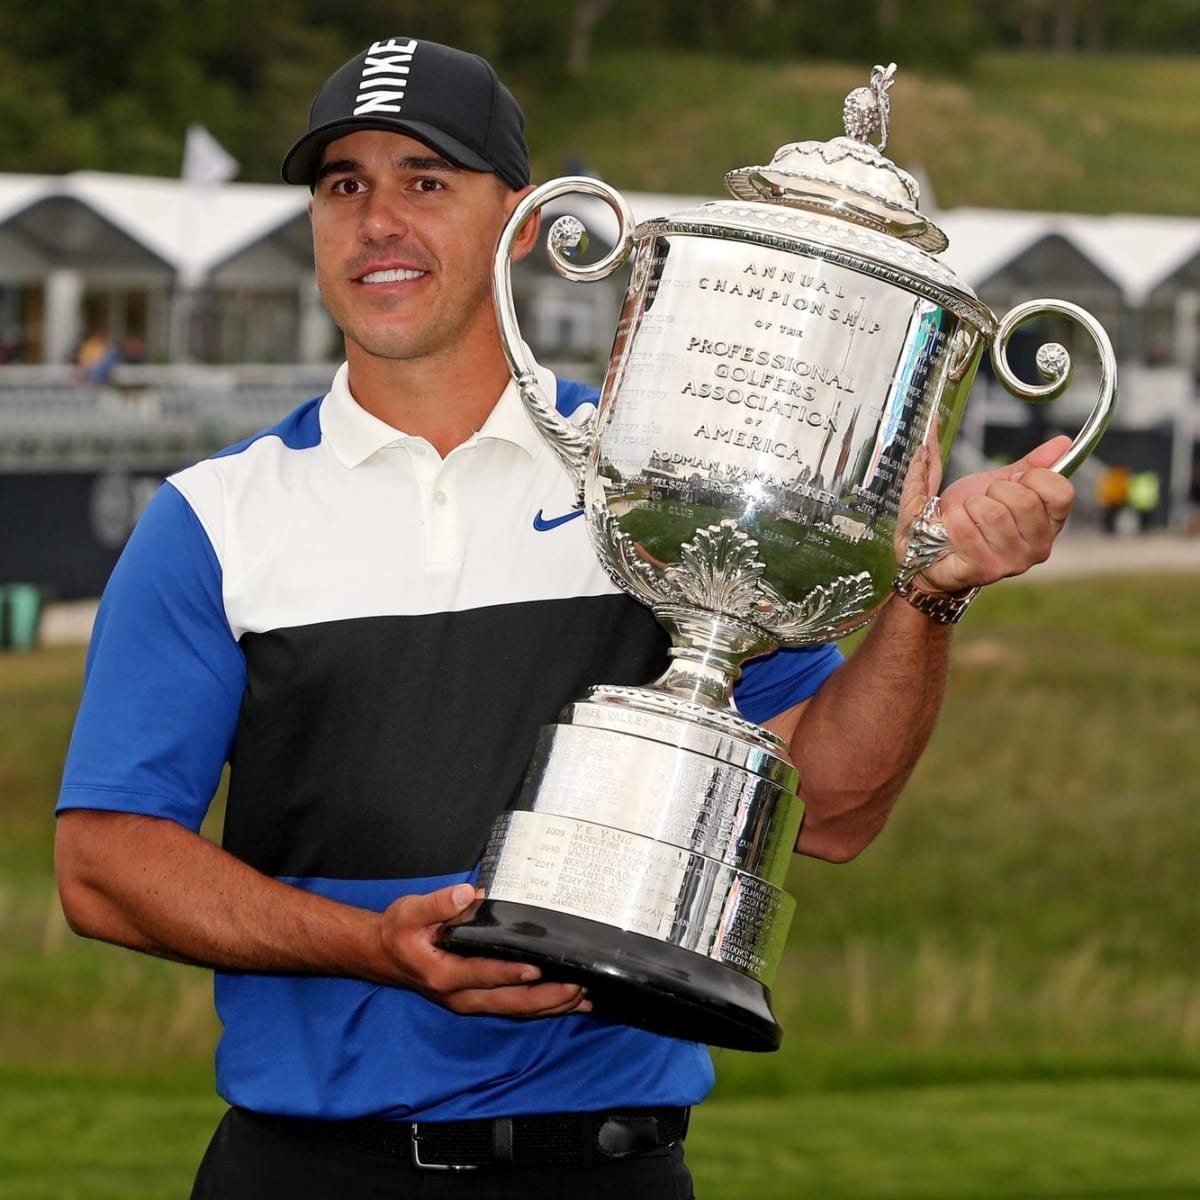 Takeaways from the PGA Championship